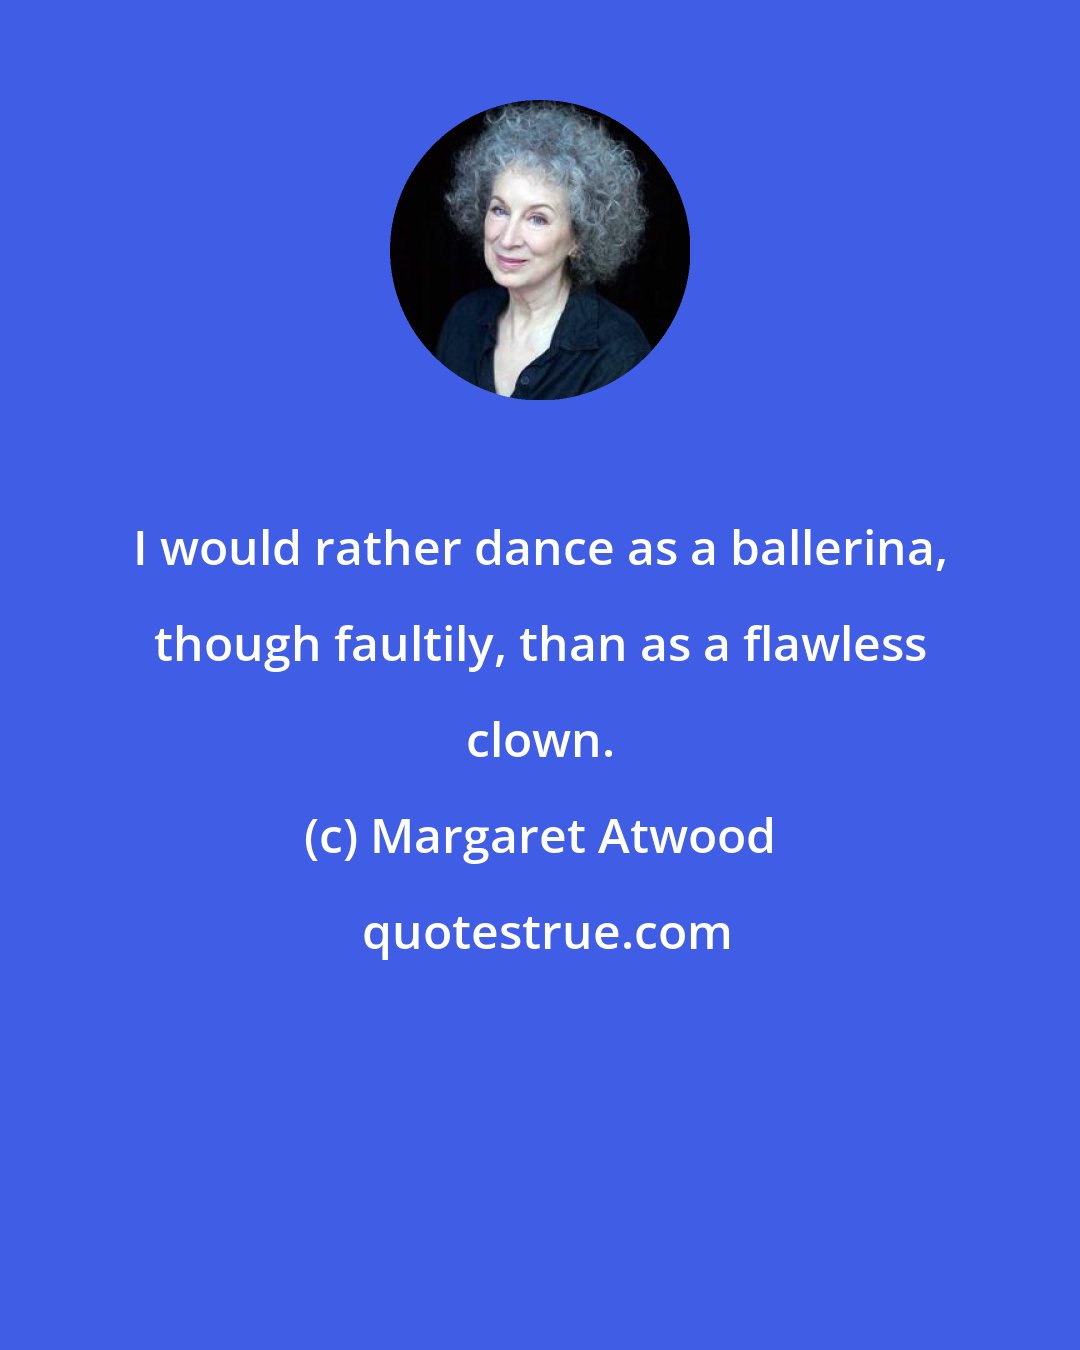 Margaret Atwood: I would rather dance as a ballerina, though faultily, than as a flawless clown.